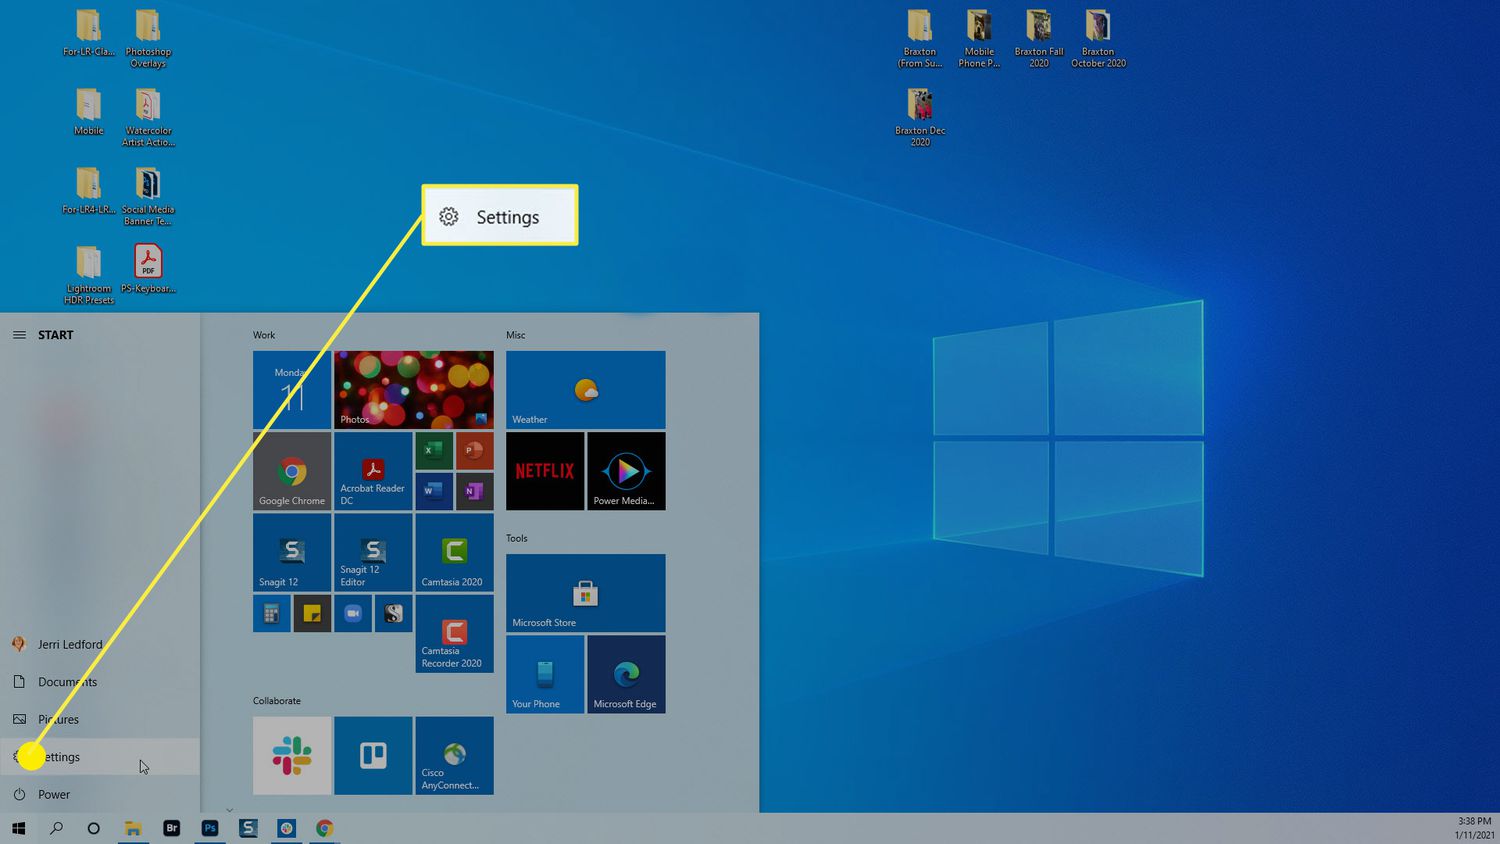 How To Rotate Or Rotate The Screen In Windows 10